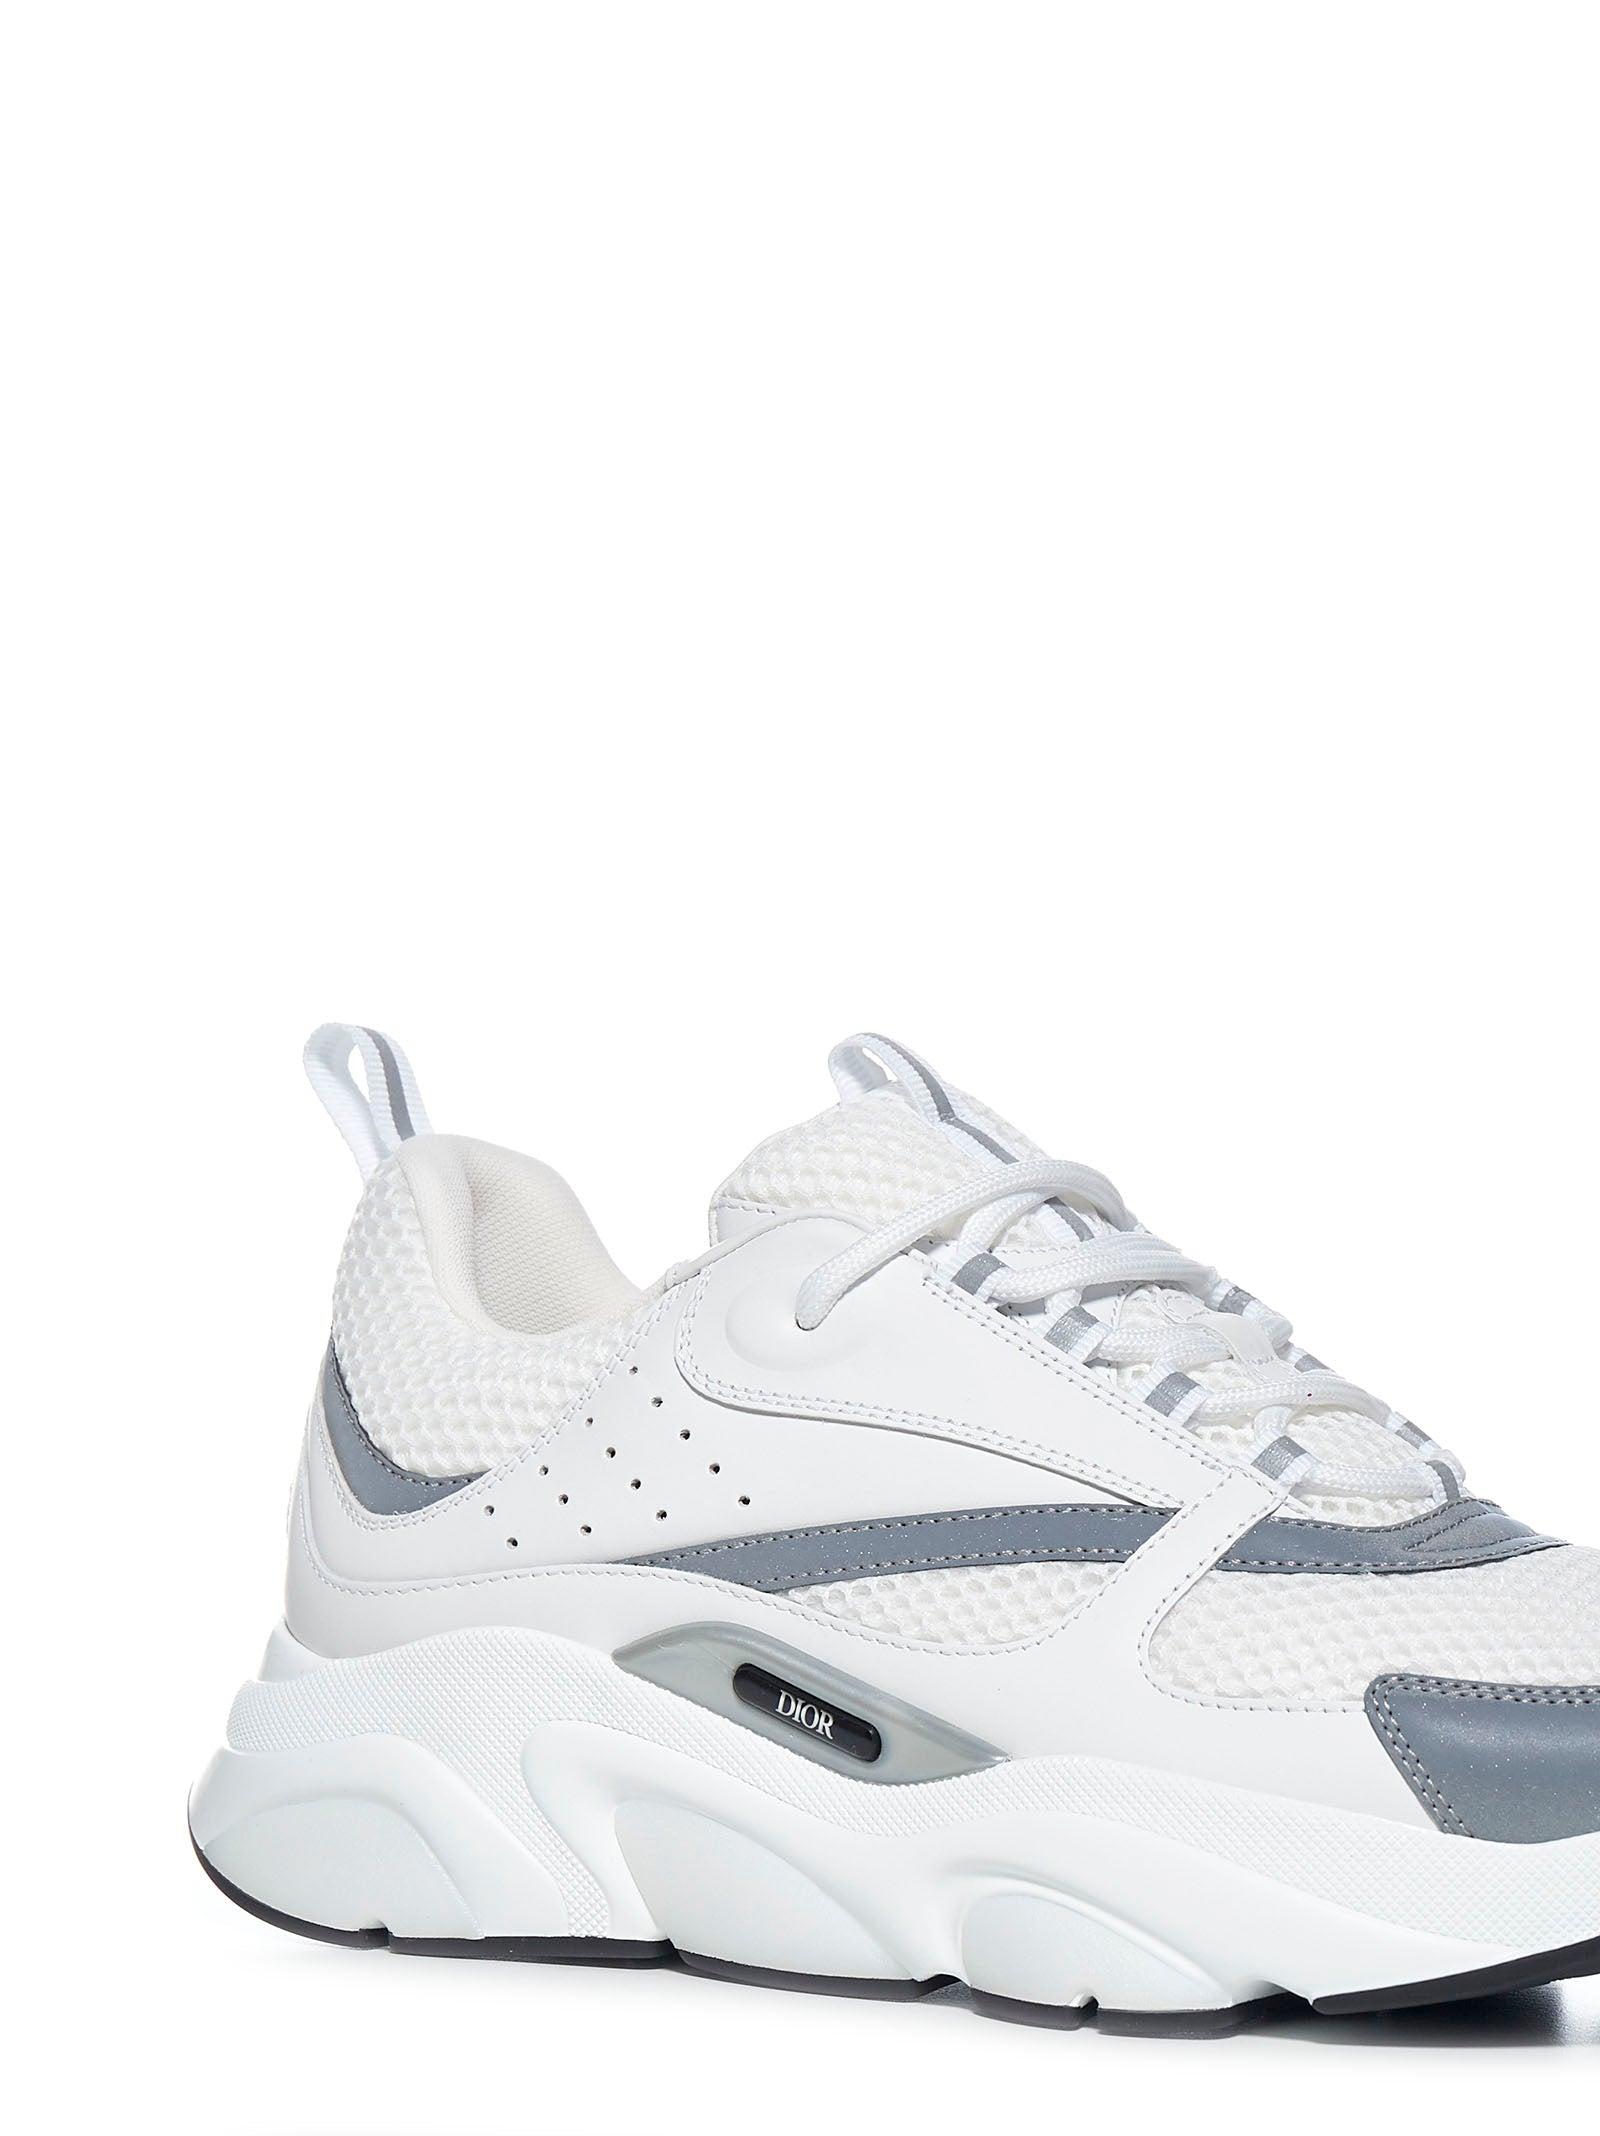 Dior B22 Sneakers in White for Men